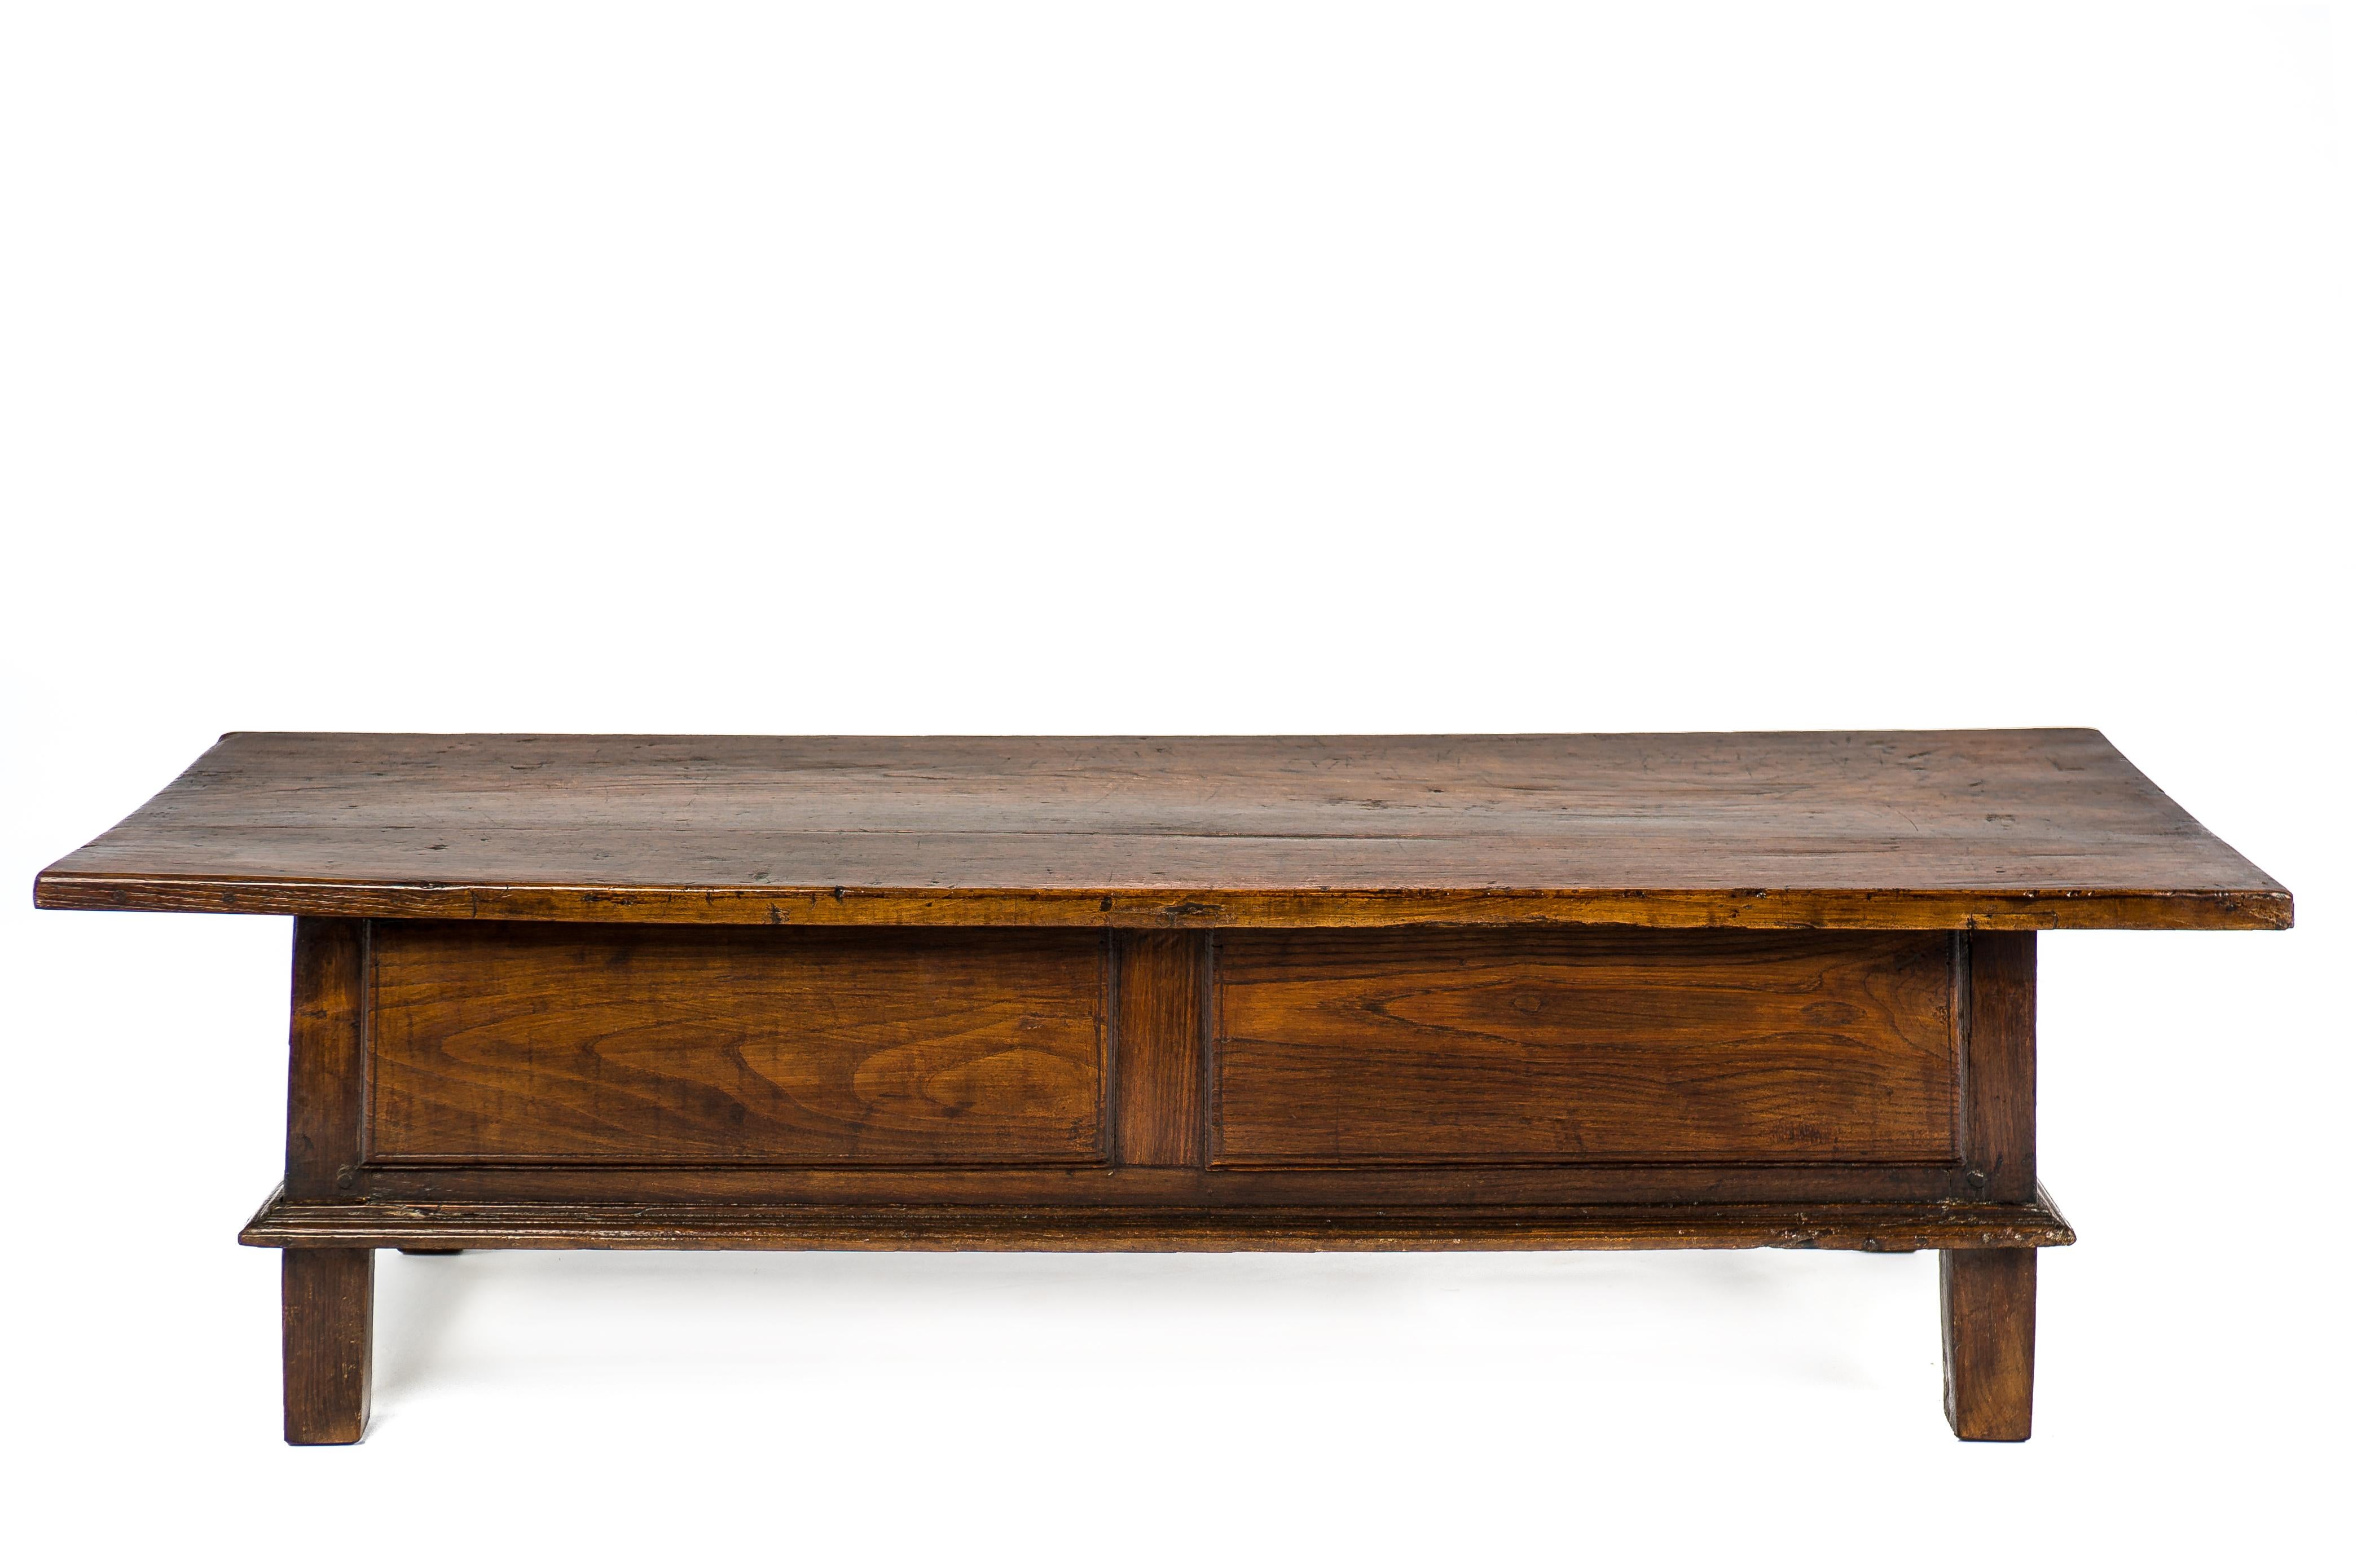 Polished Antique 18th-Century Rustic Spanish Warm Brown Chestnut Coffee Table